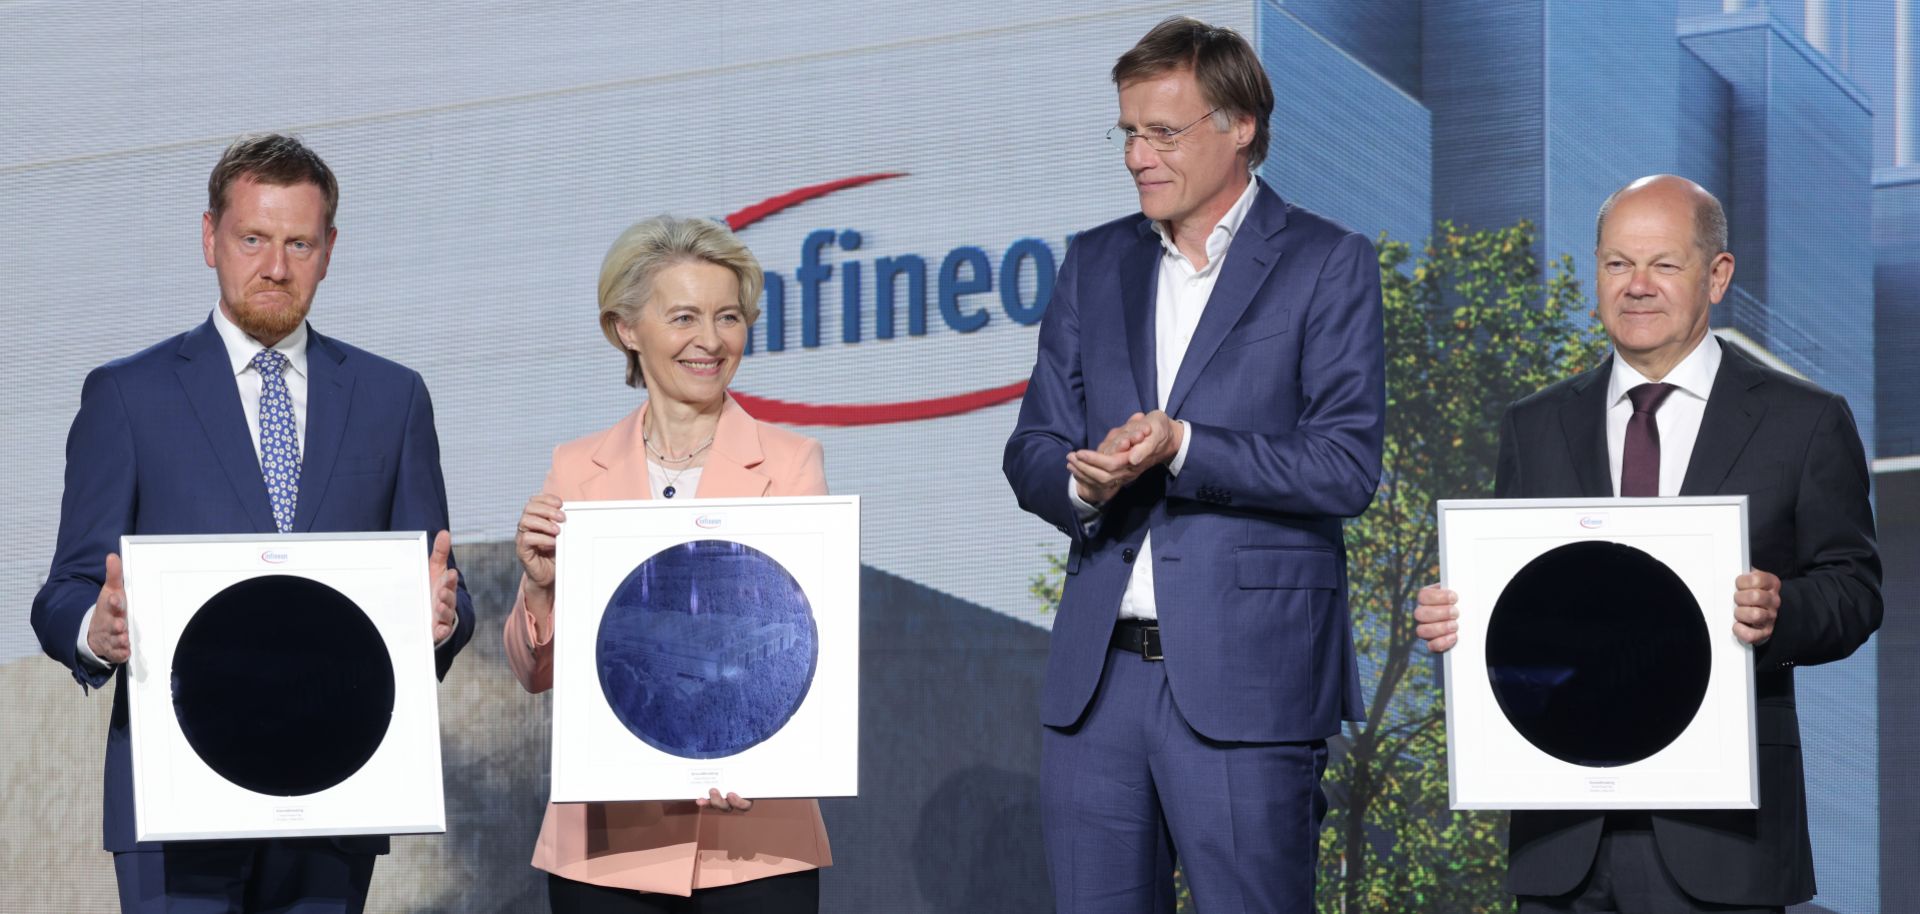 (L-R) Saxony Premier Michael Kretschmer, European Commission President Ursula von der Leyen and German Chancellor Olaf Scholz hold semiconductor wafers as Infineon CEO Jochen Hanebeck (second from right) looks on during a ground-breaking ceremony for a new semiconductor factory in Dresden, Germany, on May 2, 2023. 